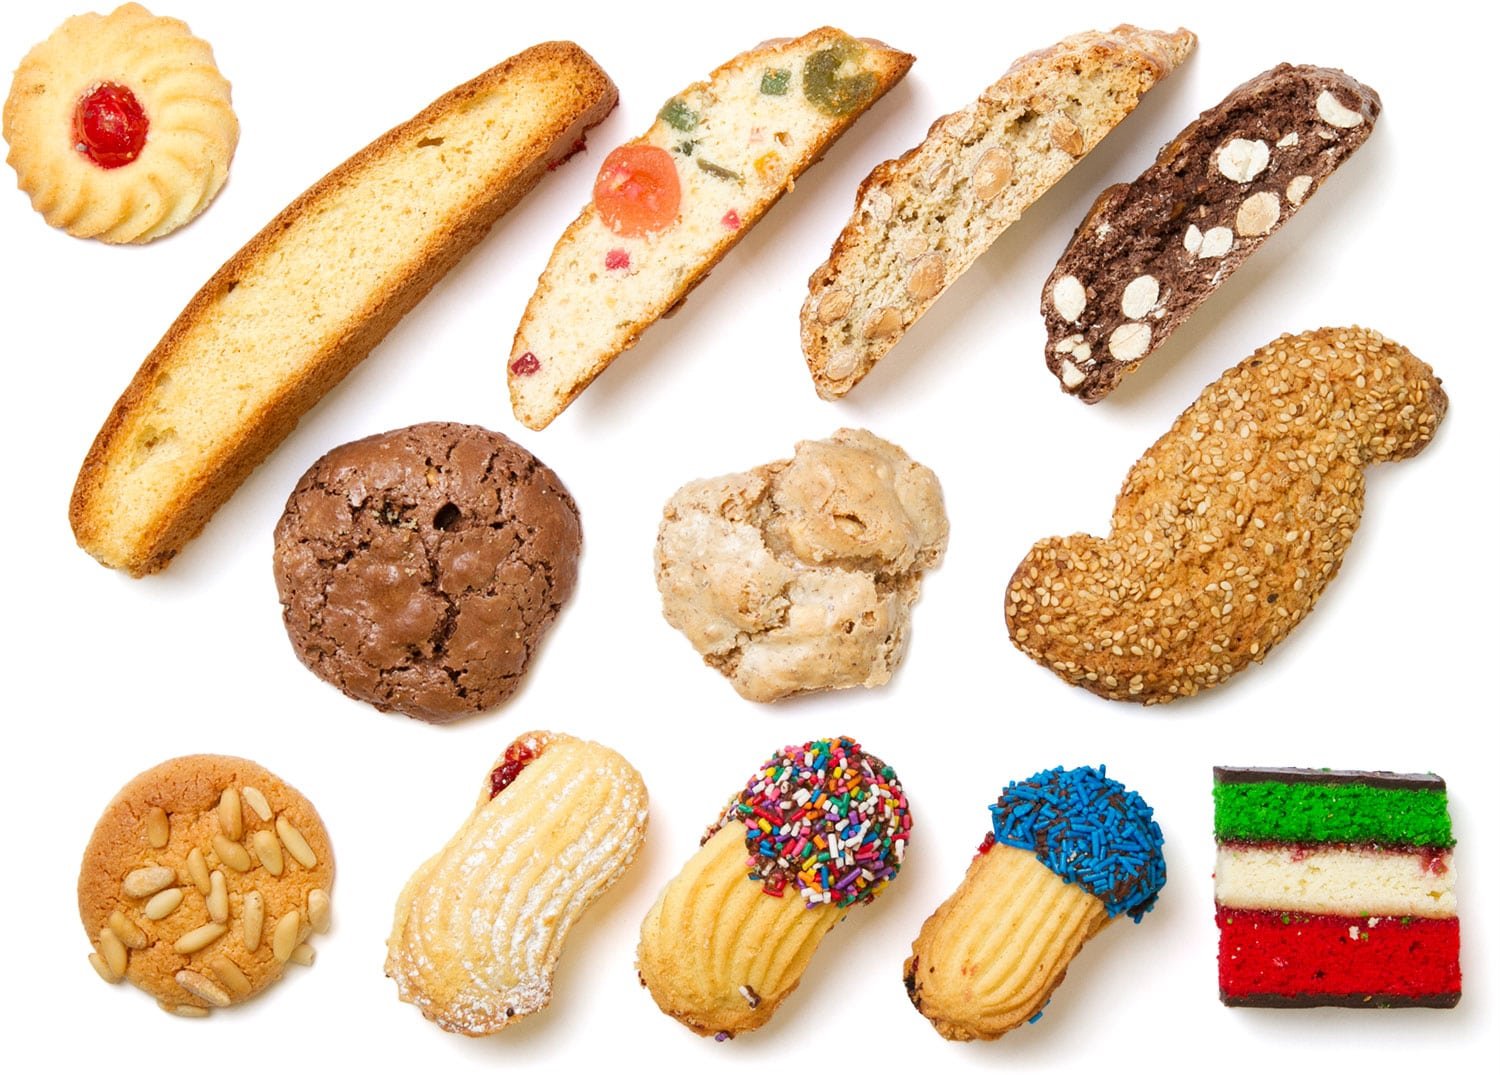 A Closer Look At Your Italian Bakery's Cookie Case